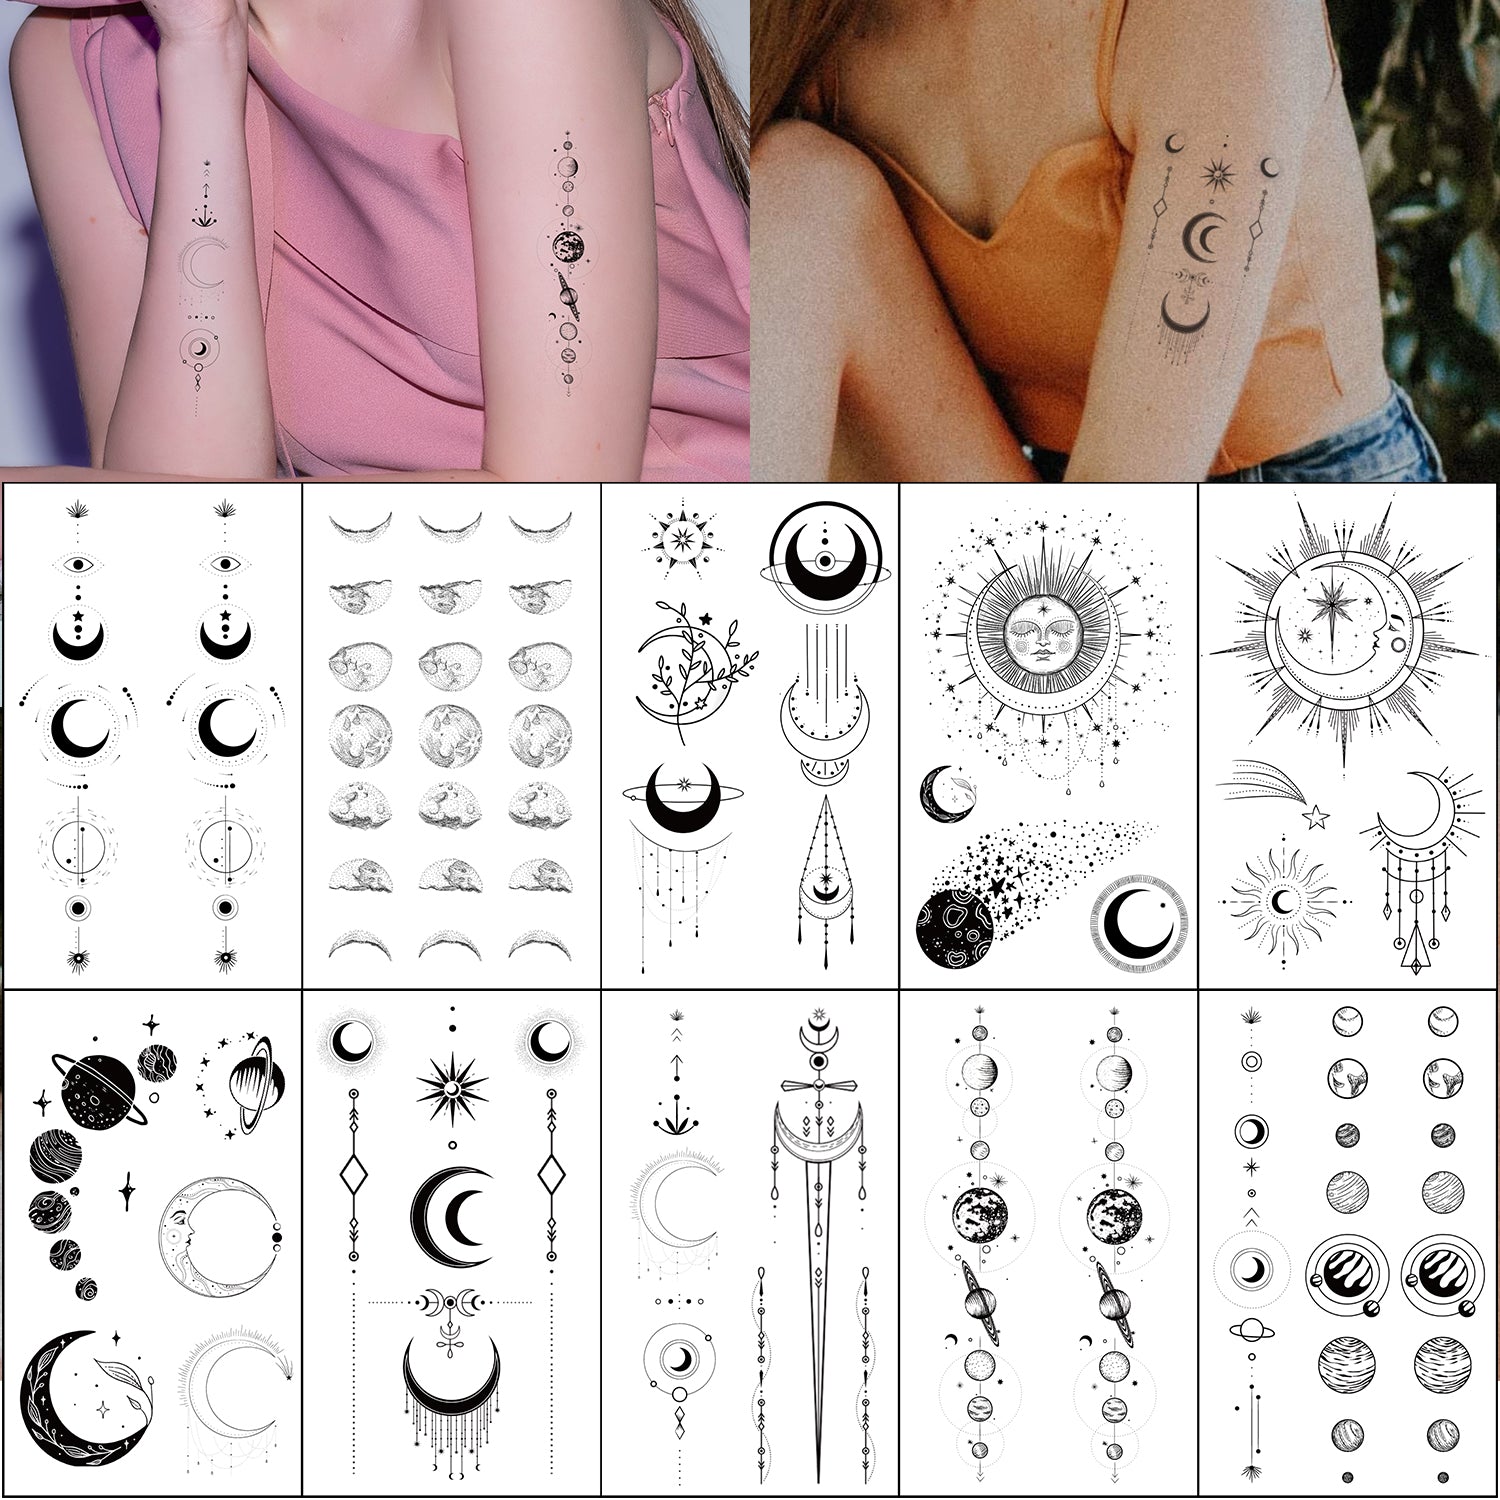 small tattoos spine tattoo designs boho mysterious planet chain vertical women tattoo ideas sexy chest back neck tattoo ideas female meaningful crescent tattoos